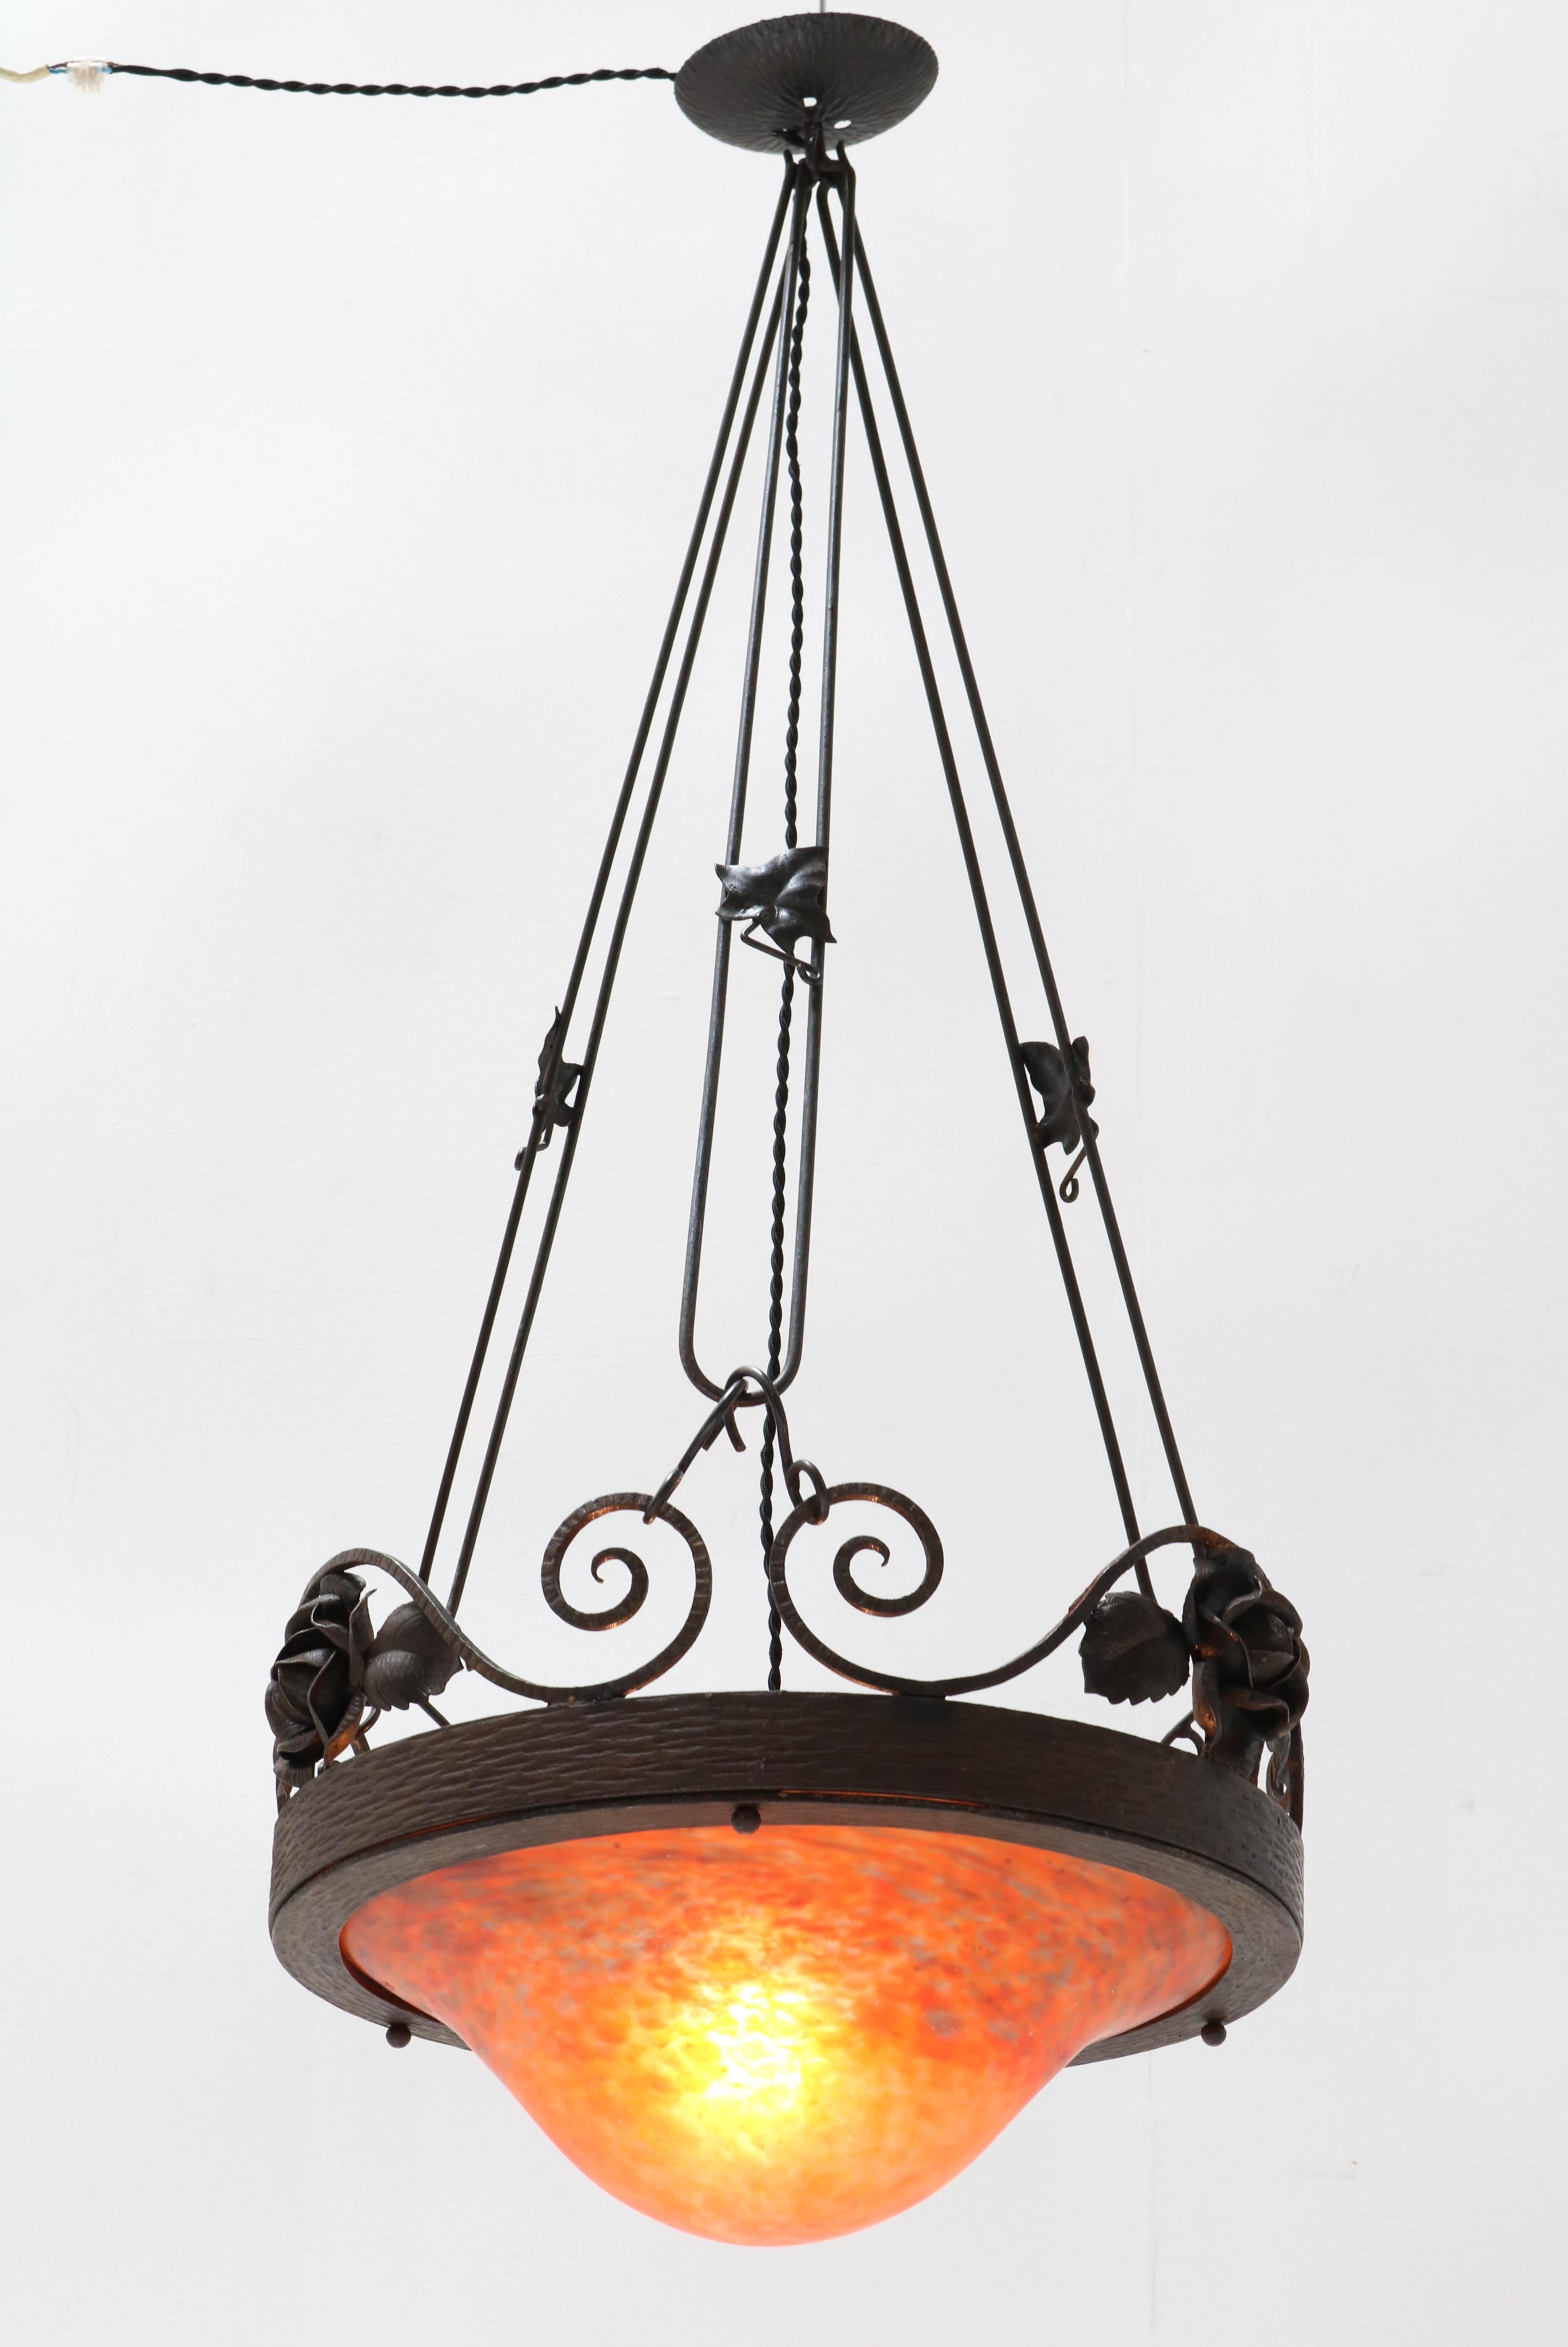 Lacquered French Art Nouveau Chandelier by Muller Frères Lunéville, 1900s For Sale